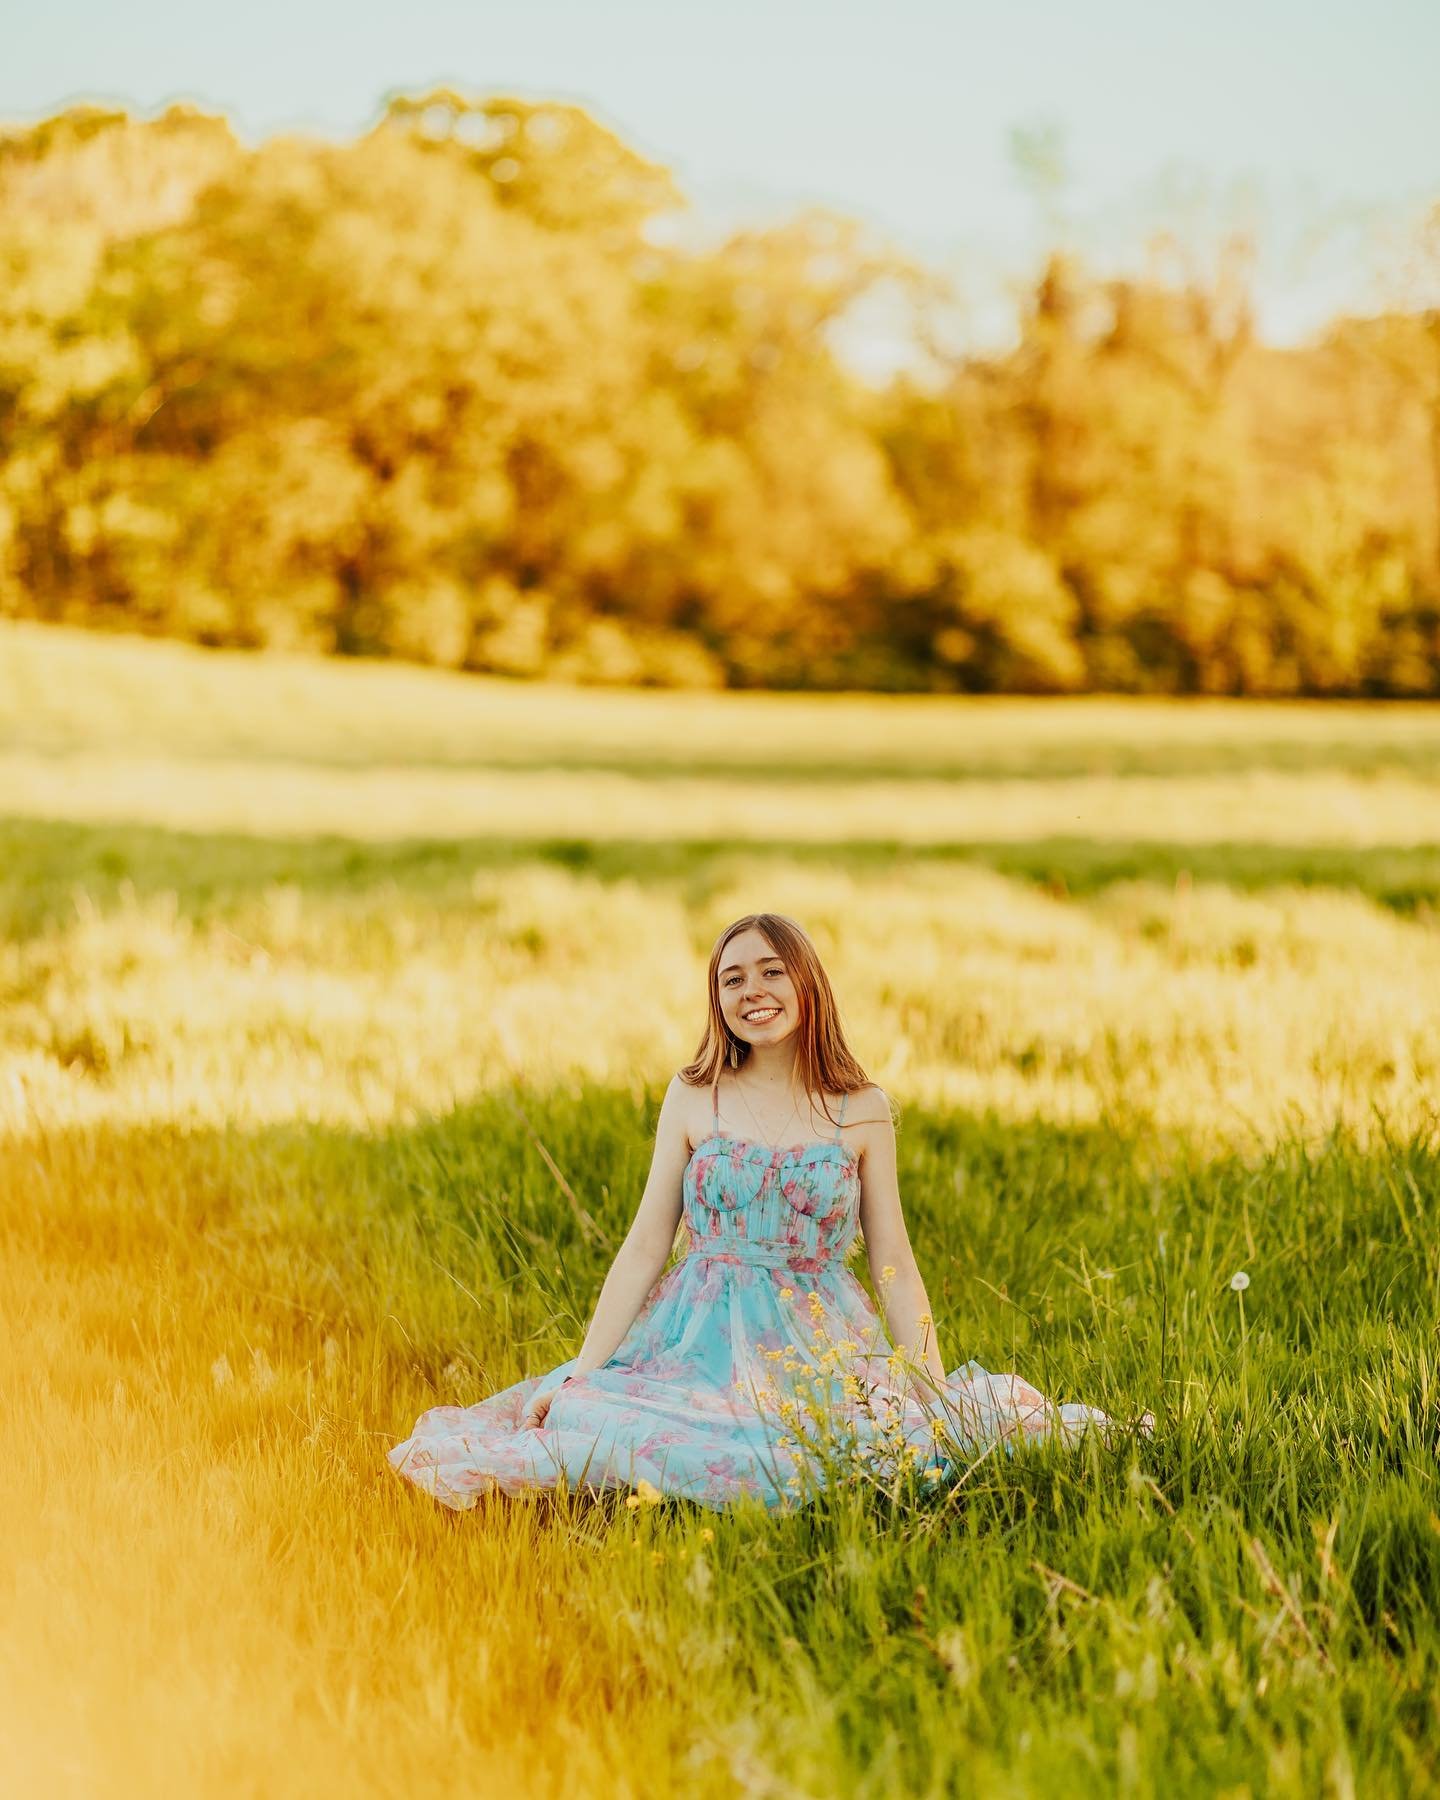 Senior photos with REESE!!! 🌳🌼🌿💫✨

Last night was awesome!!! So much fun frolicking in the sun drenched fields with this sweet grad! Literally felt like we were in a fairytale, I mean the princess vibe dress?!!! YES 🩵 I&rsquo;ve known Reese for 